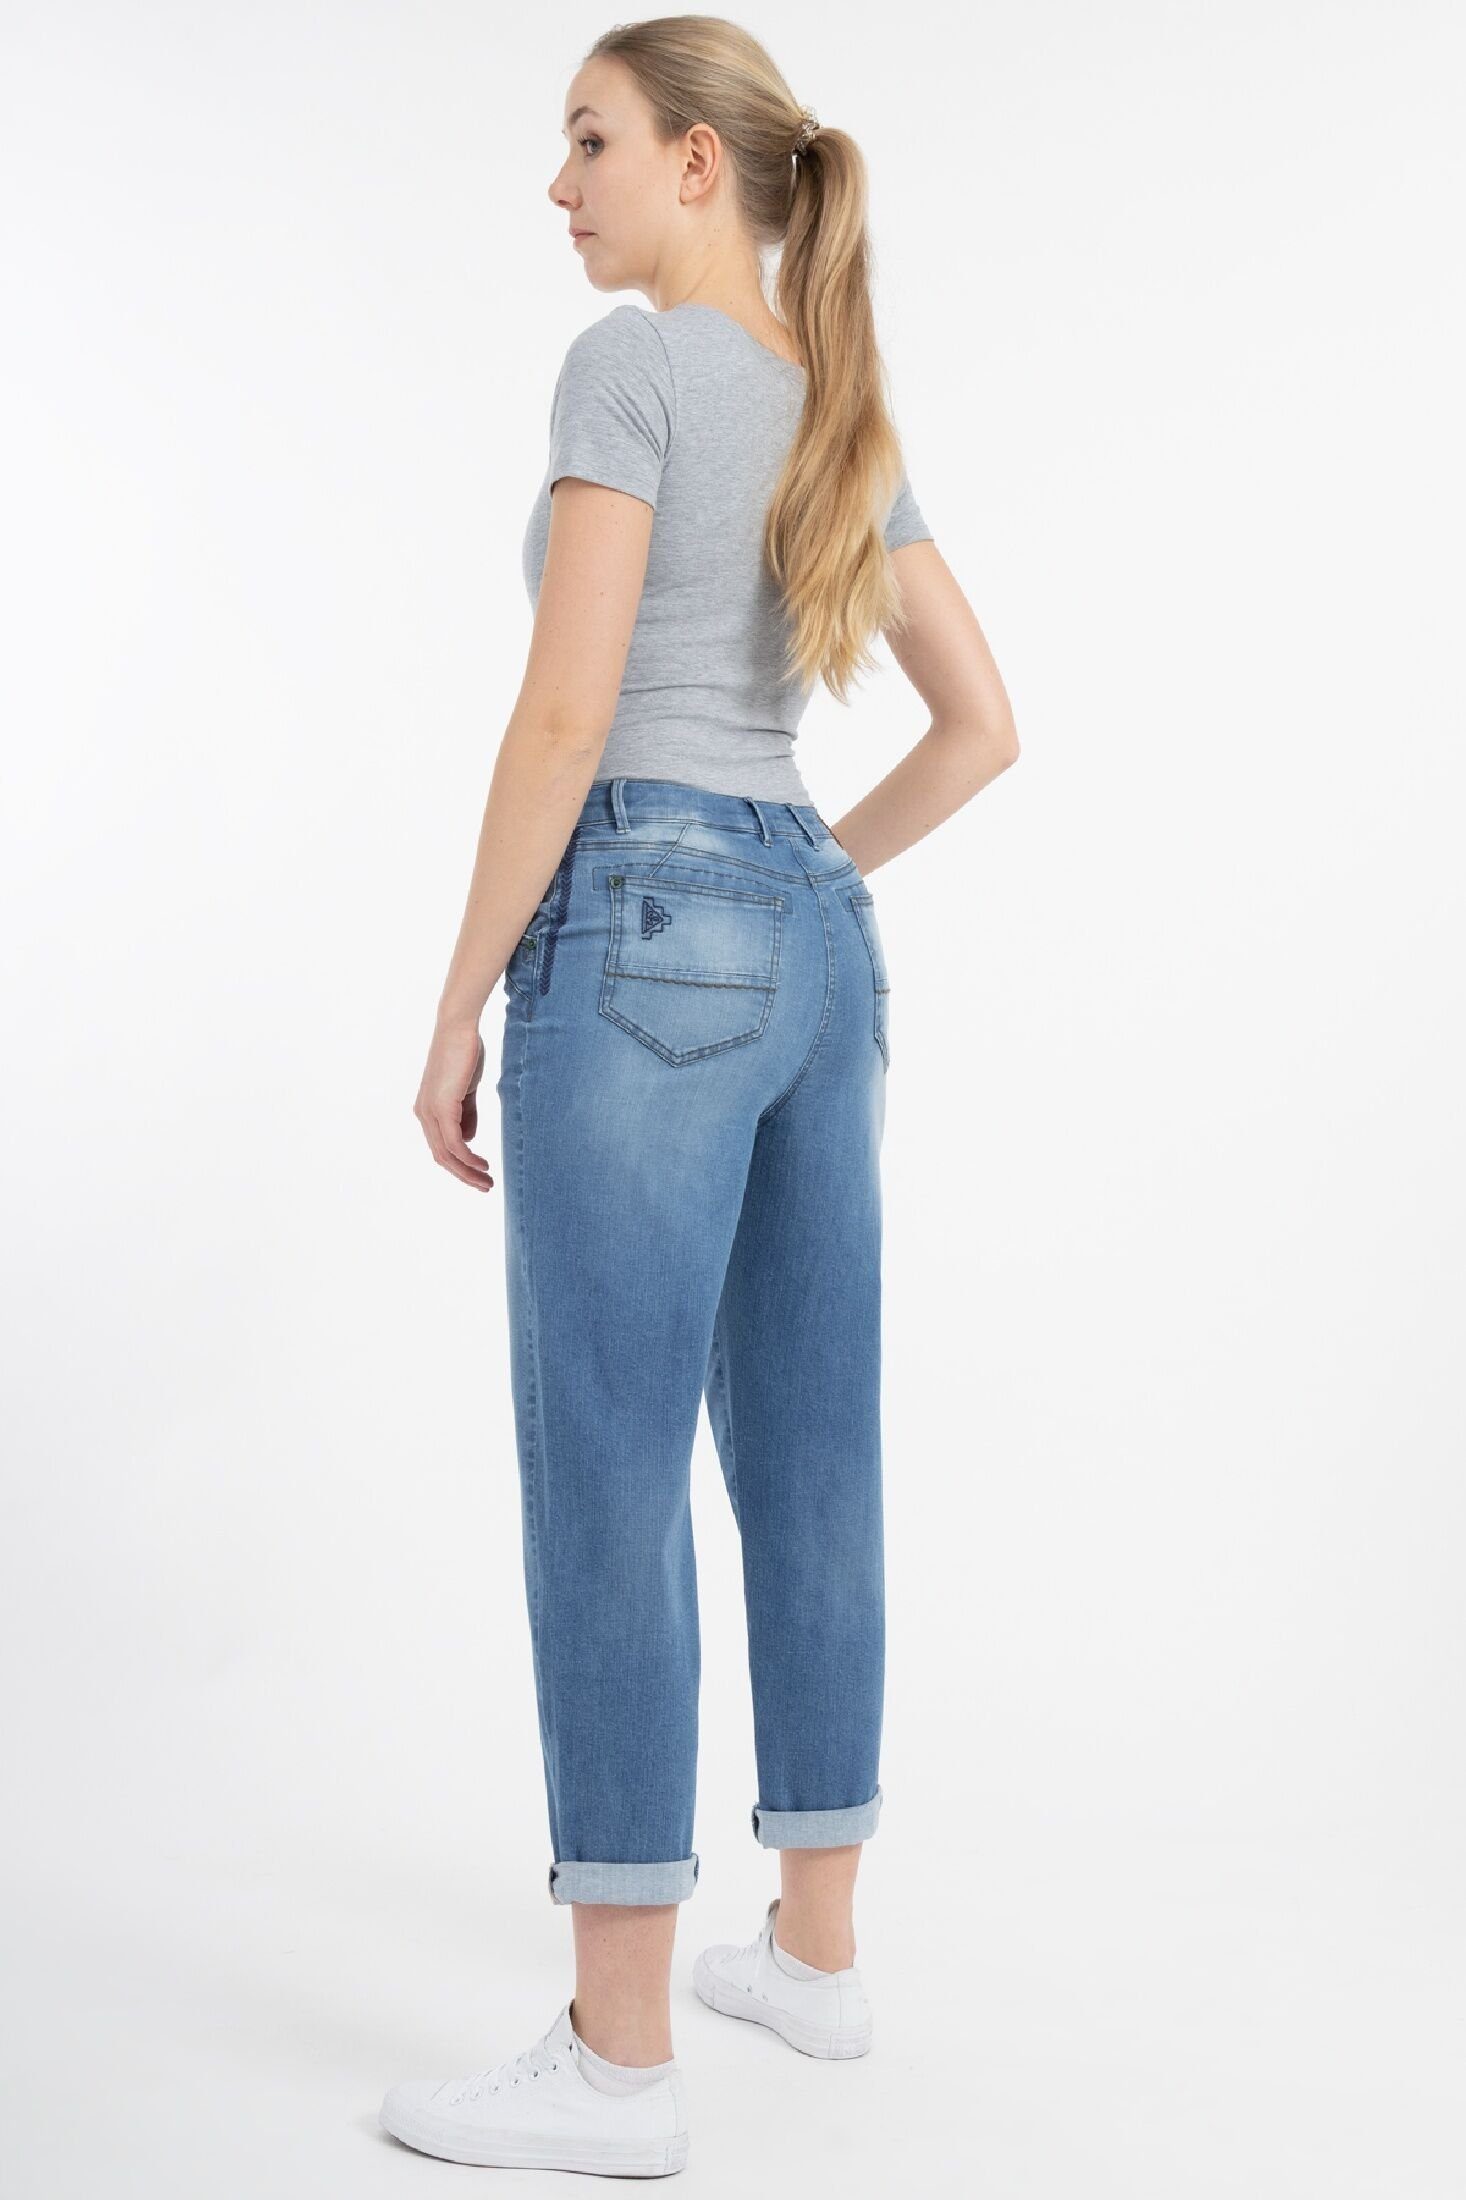 Recover Pants Relax-fit-Jeans ALLEGRA DENIM-BLUE